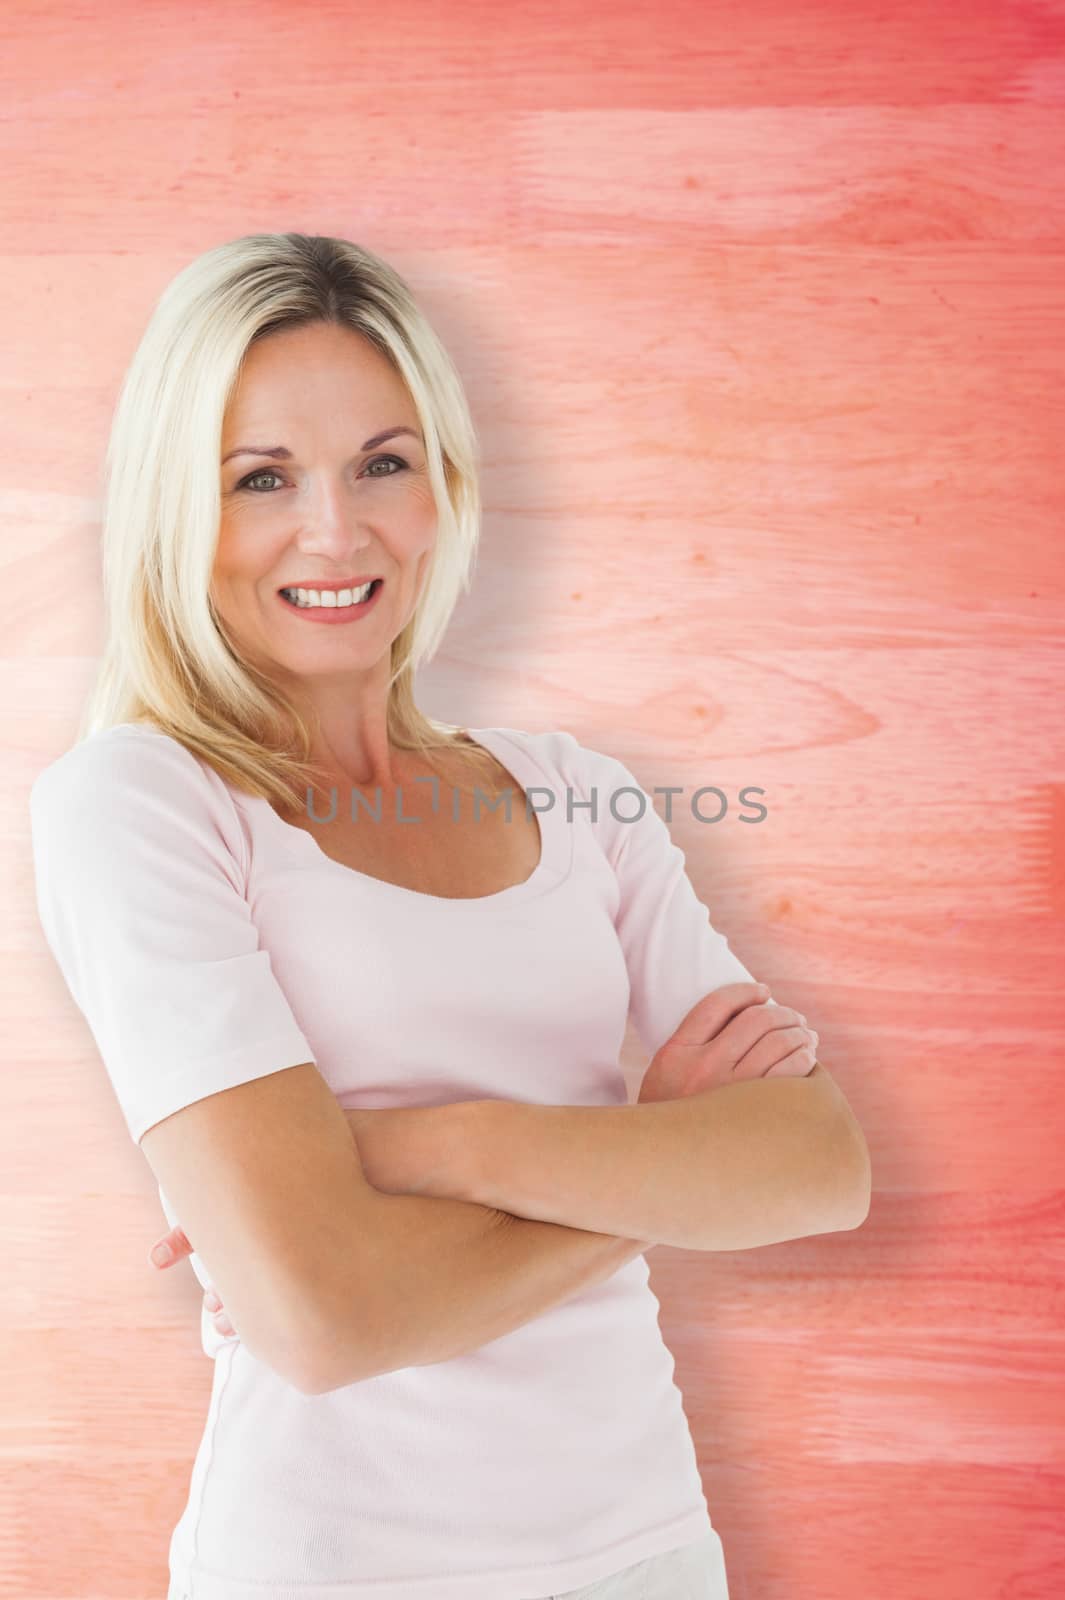 Happy blonde smiling with arms crossed against red faded wooden planks